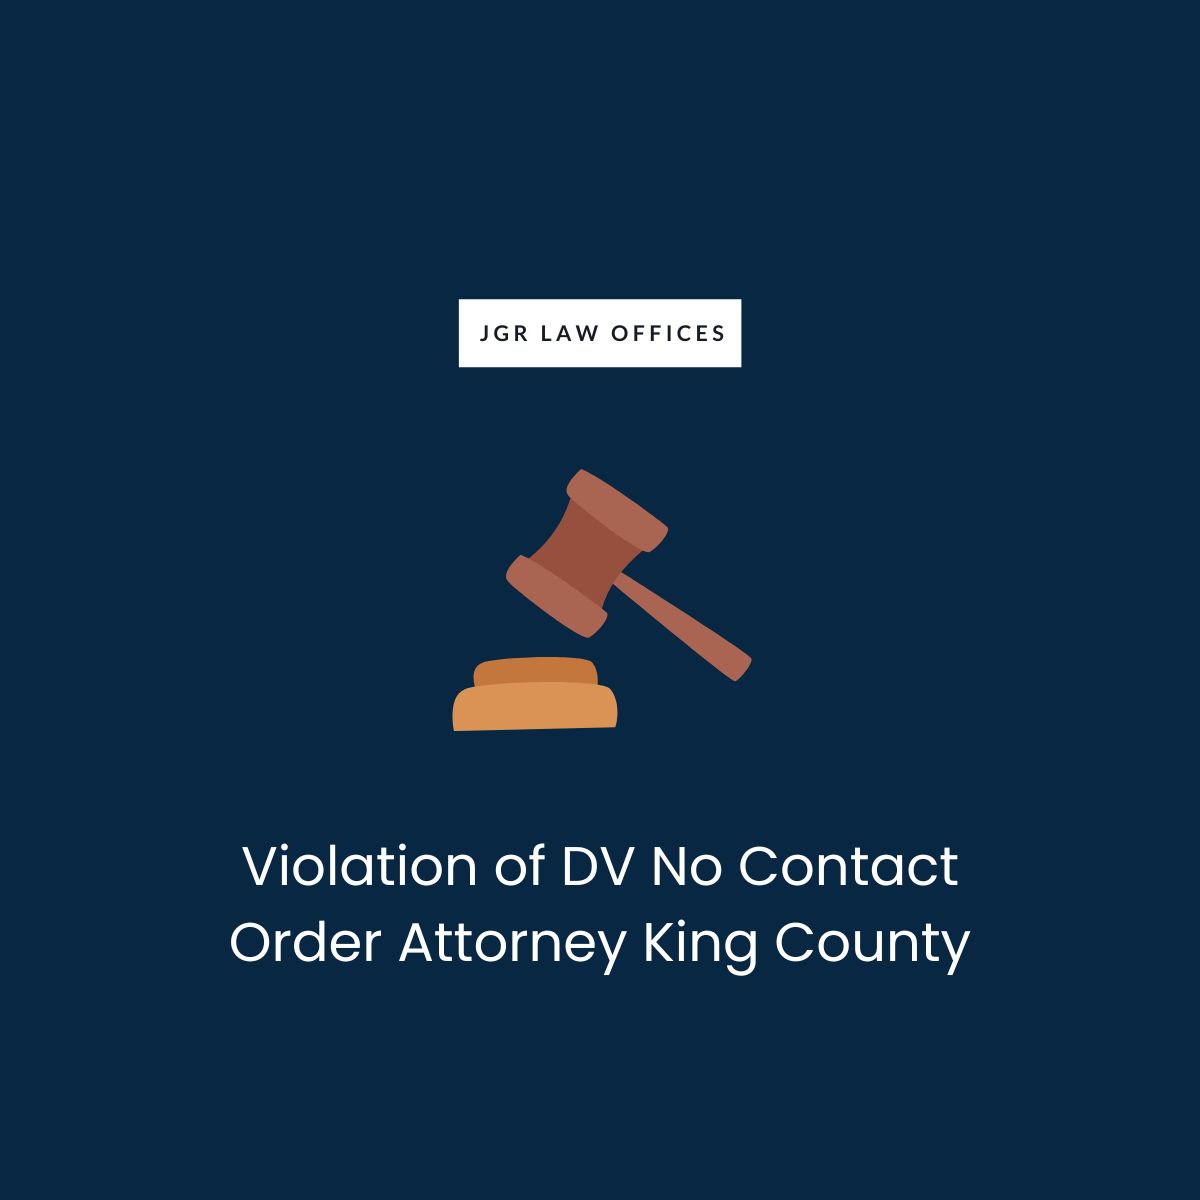 Violation of DV No Contact Order Attorney King County